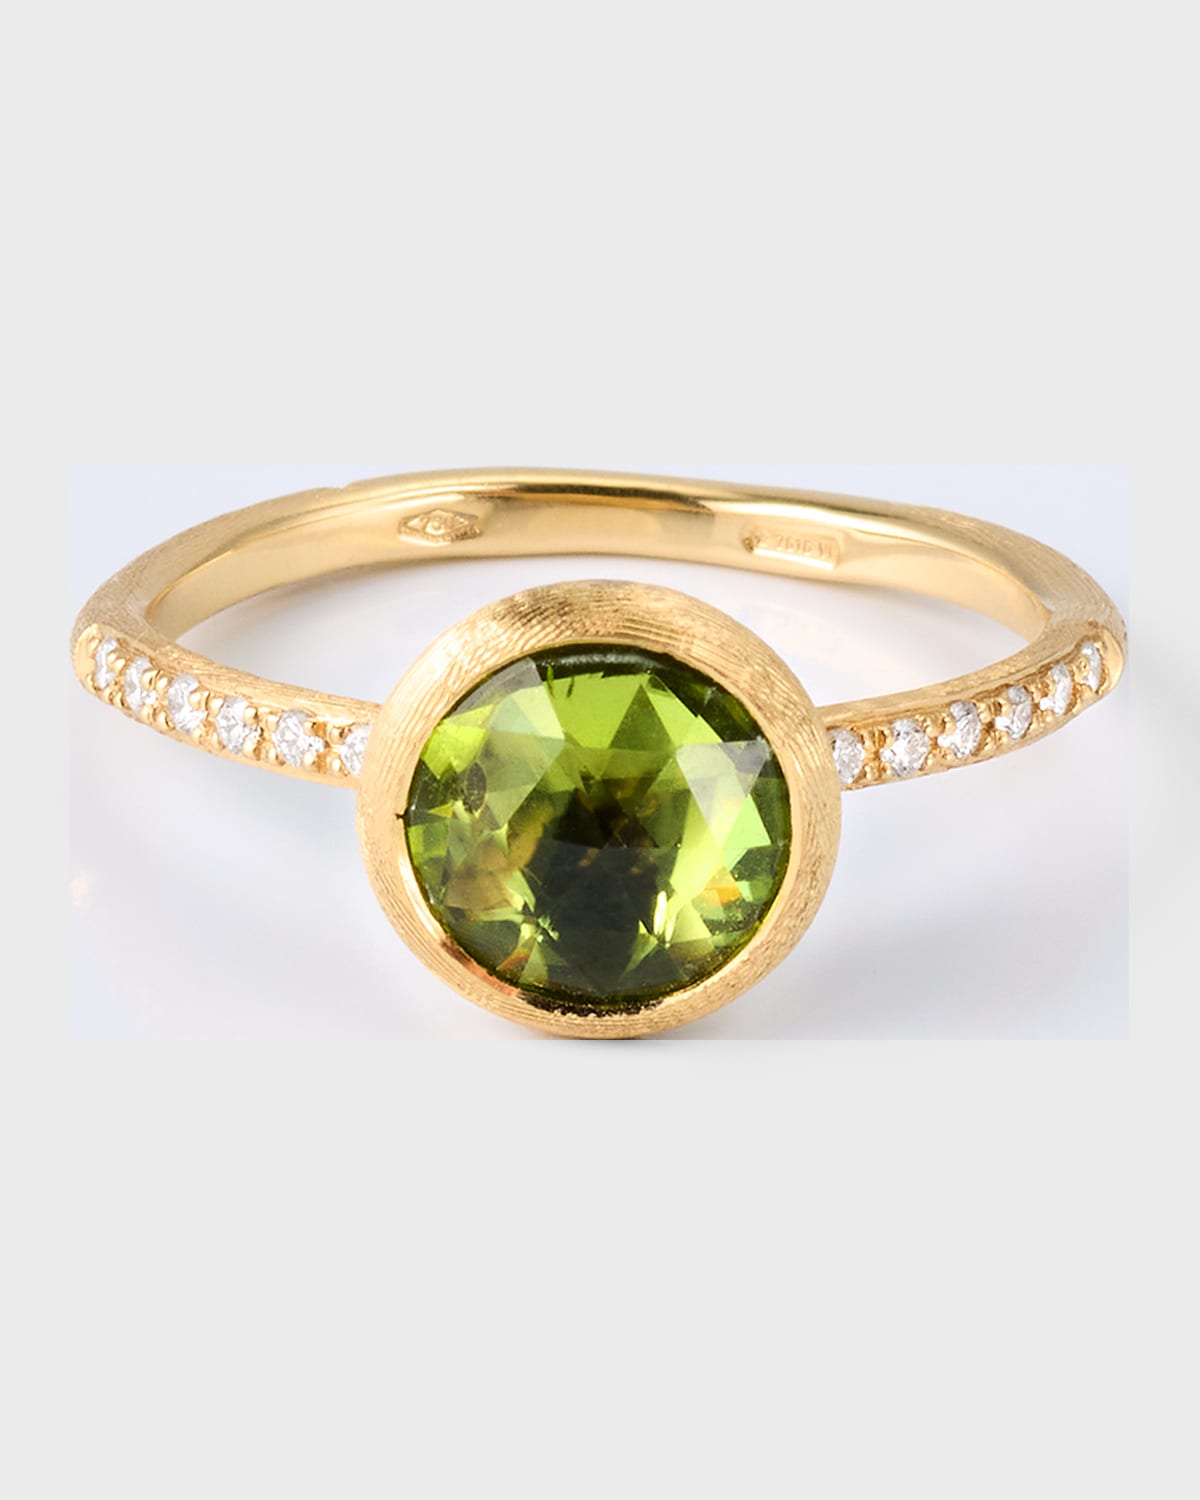 Marco Bicego Jaipur Color Stackable Ring with Peridot and Diamonds, Size 7